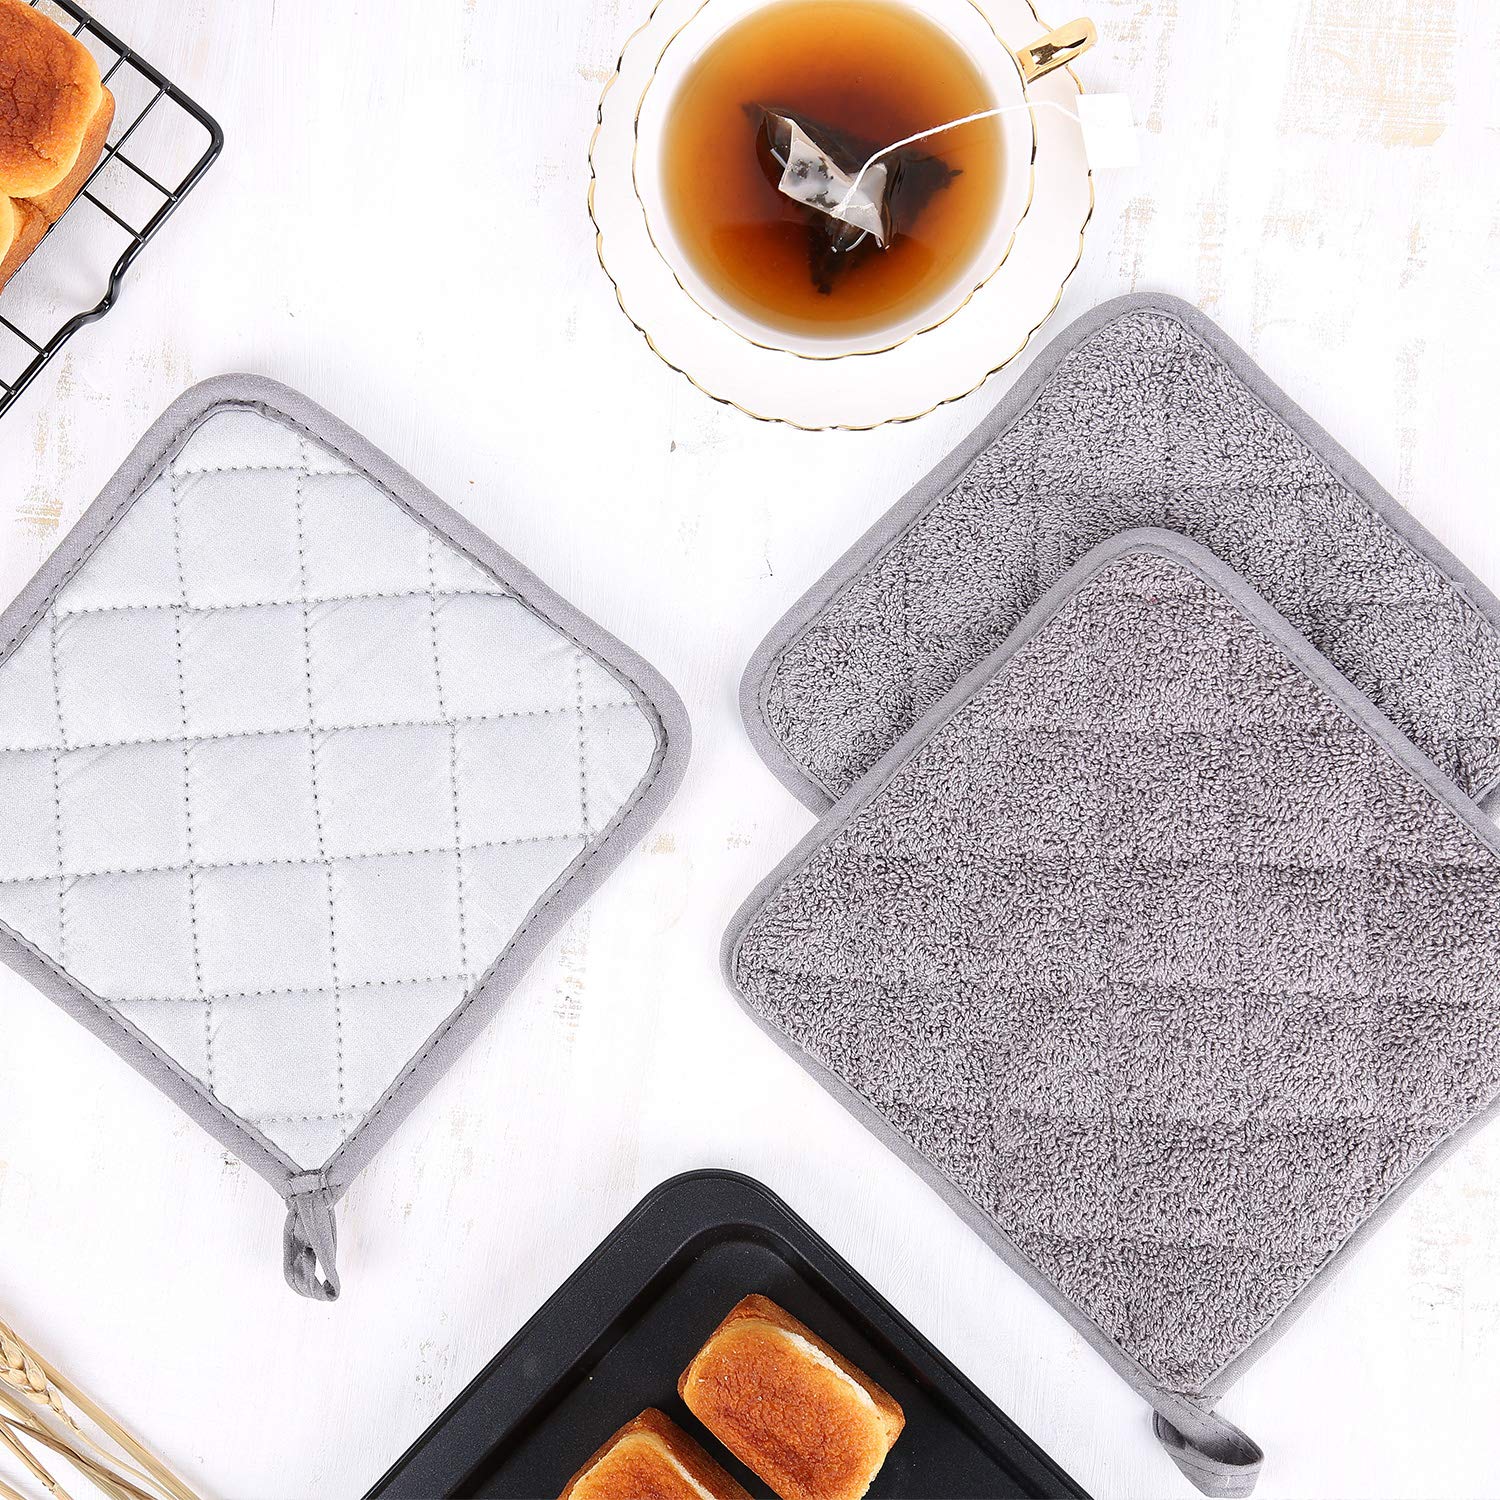 VEIKERY Oven Pot Holders 100% Cotton,7x7 inches,3 Packs,Perfect for Cooking, Baking, Serving, BBQ or Dinner Party (Gray, 3)